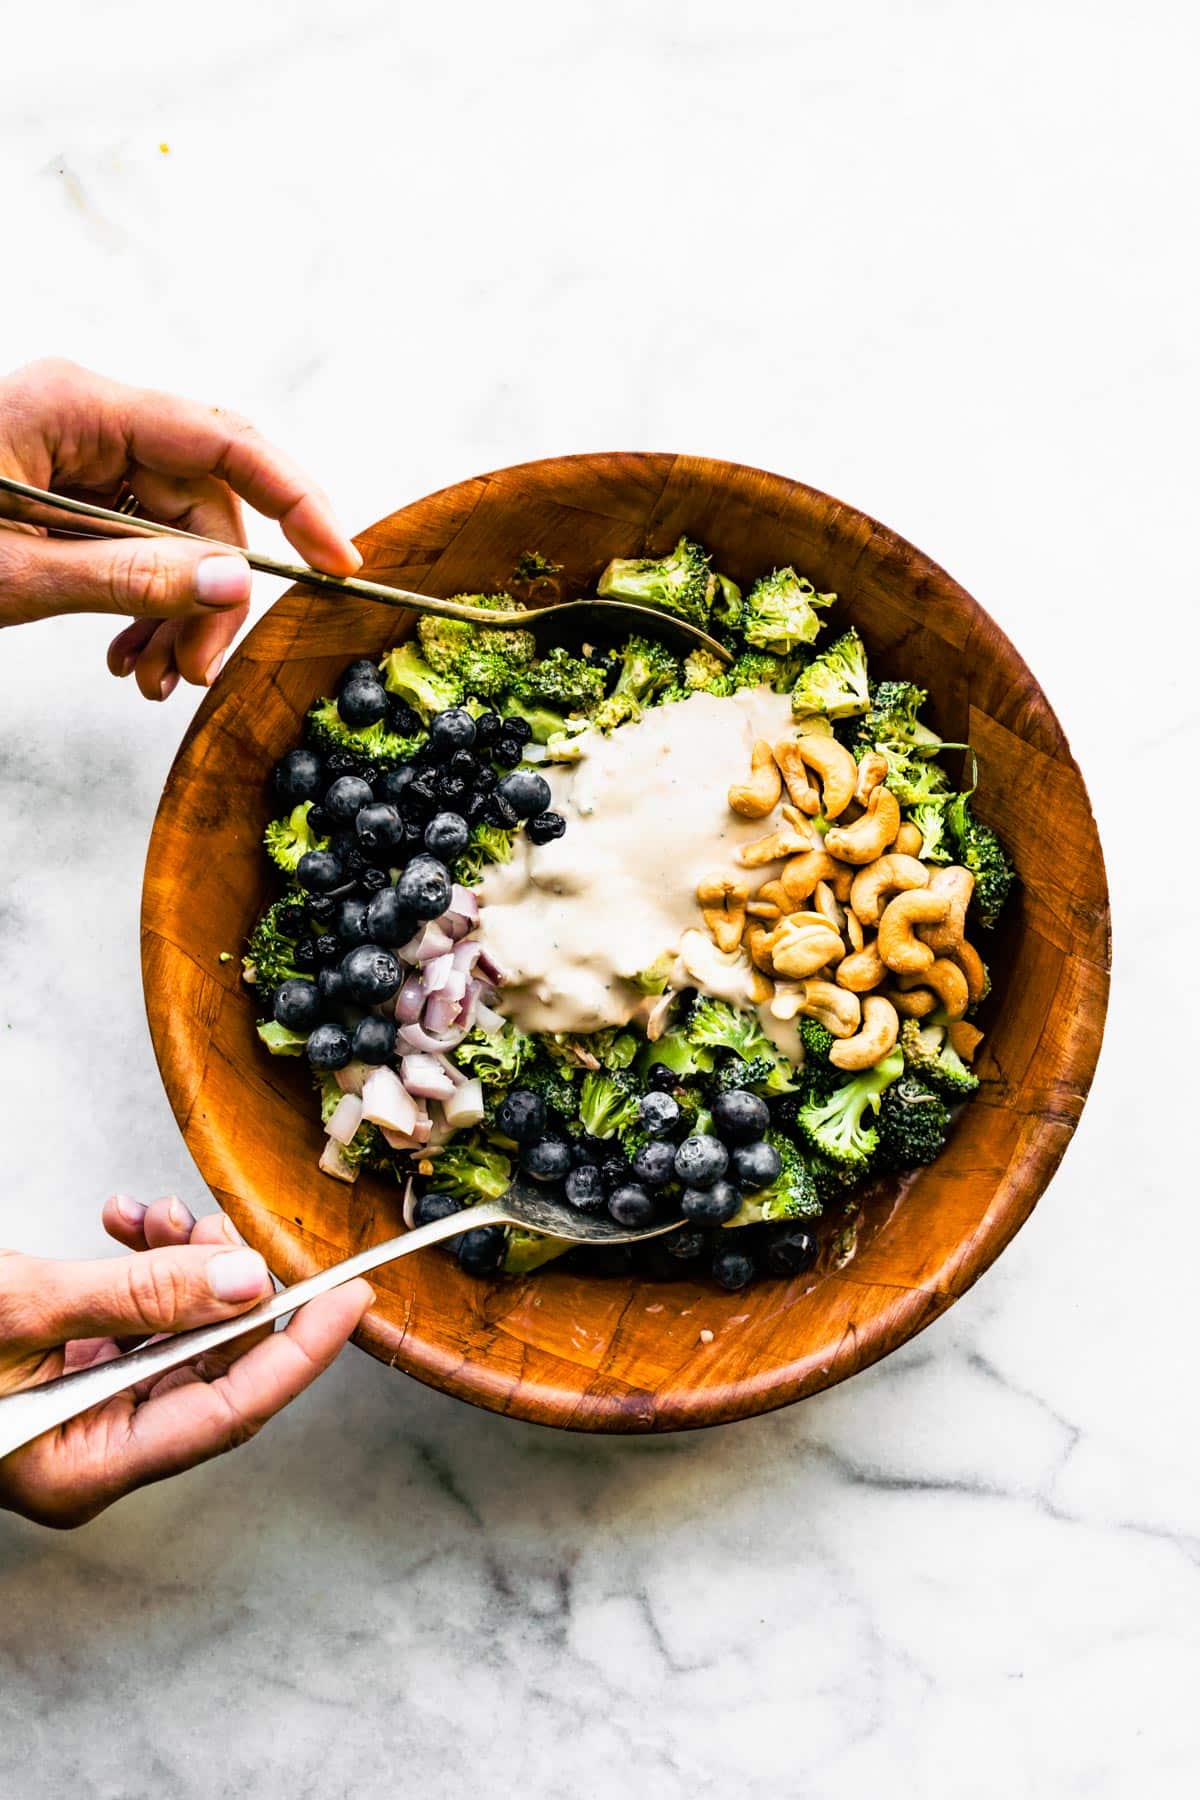 Two hands holding large spoons mixing together the ingredients of a healthy broccoli salad.